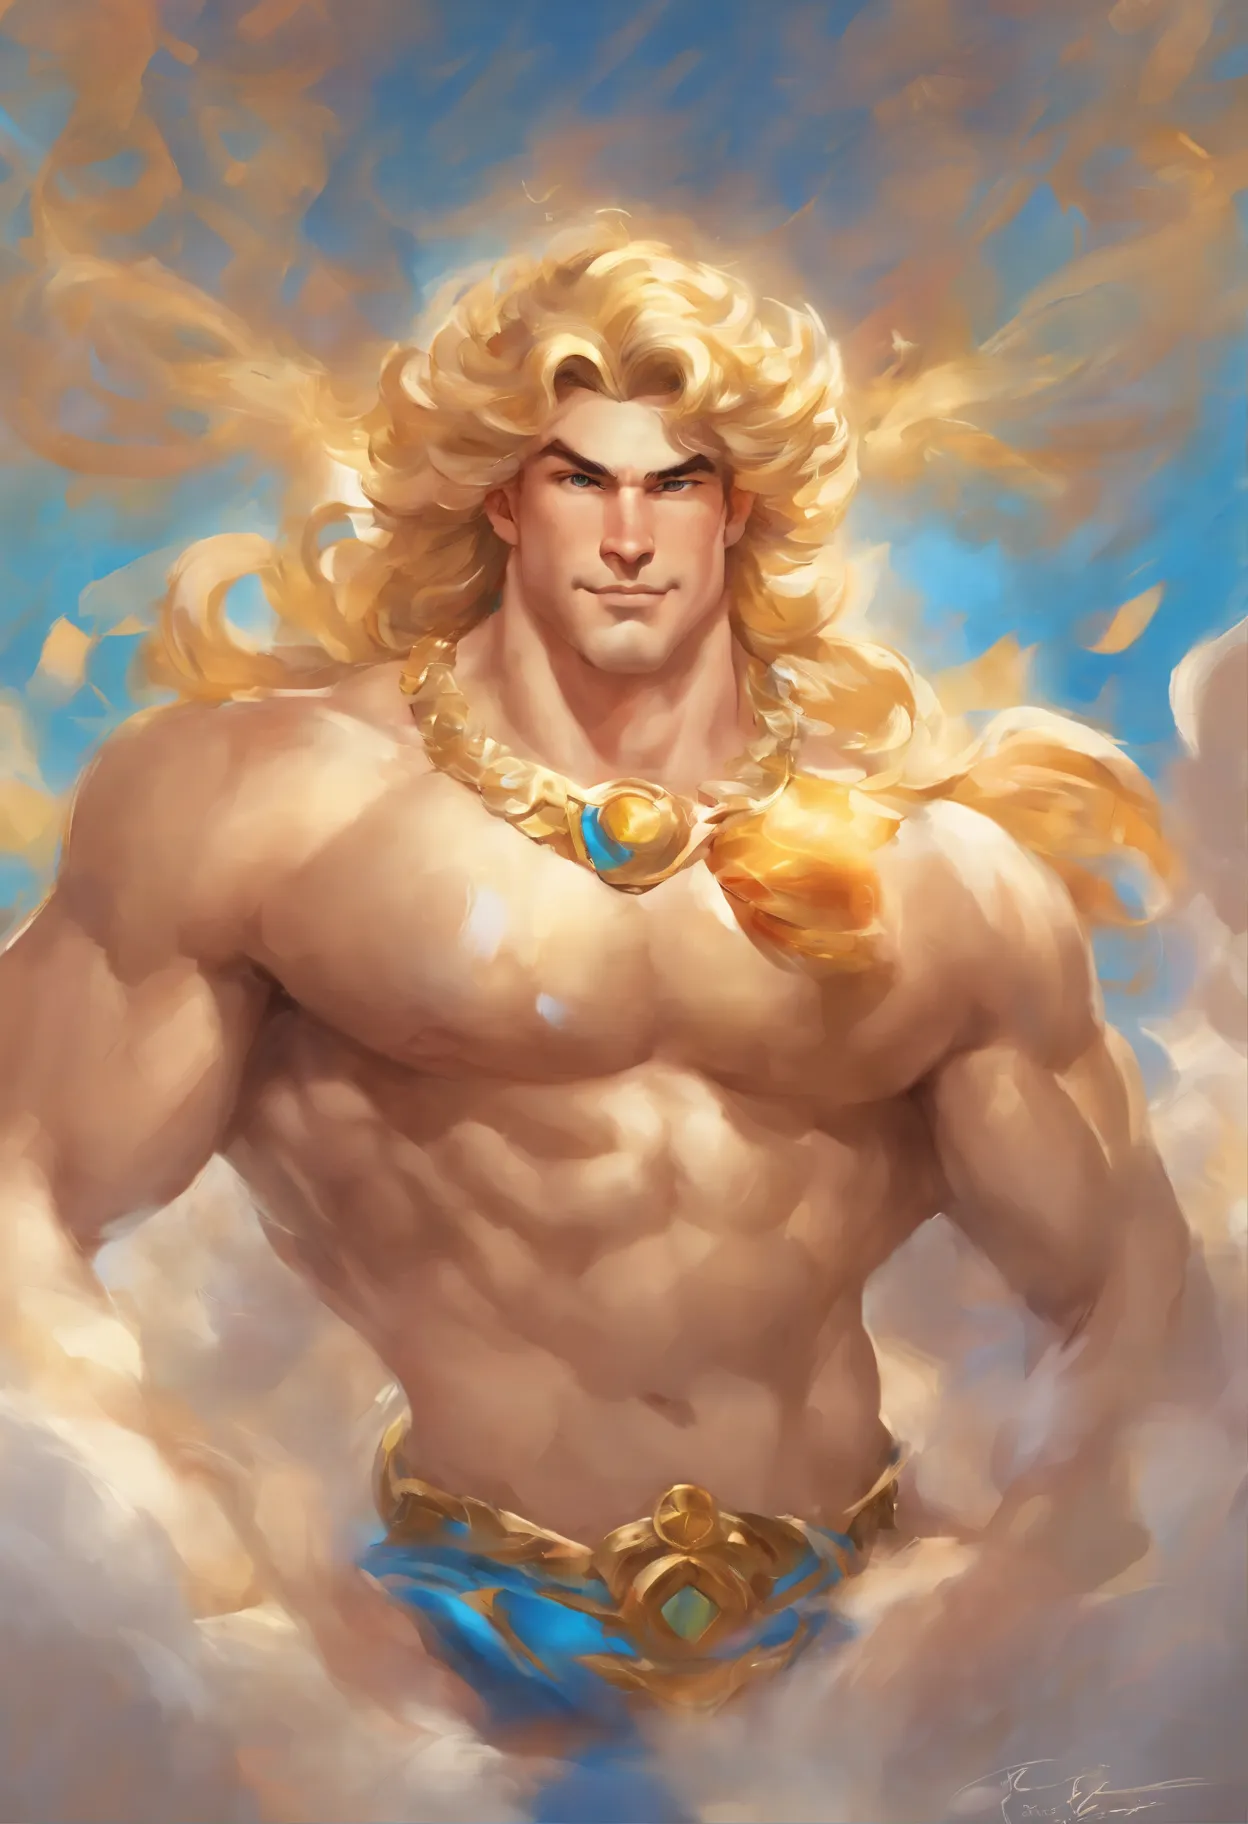 Portrait of an elegant beautifull mighty God unleashing all his powers, digital painting in the style of Robert Liberace, dynamic action poses of stout god apollo, god of light a d art, greek god, blond hair, male, youbg, handsome, upper body, muscular, ha...